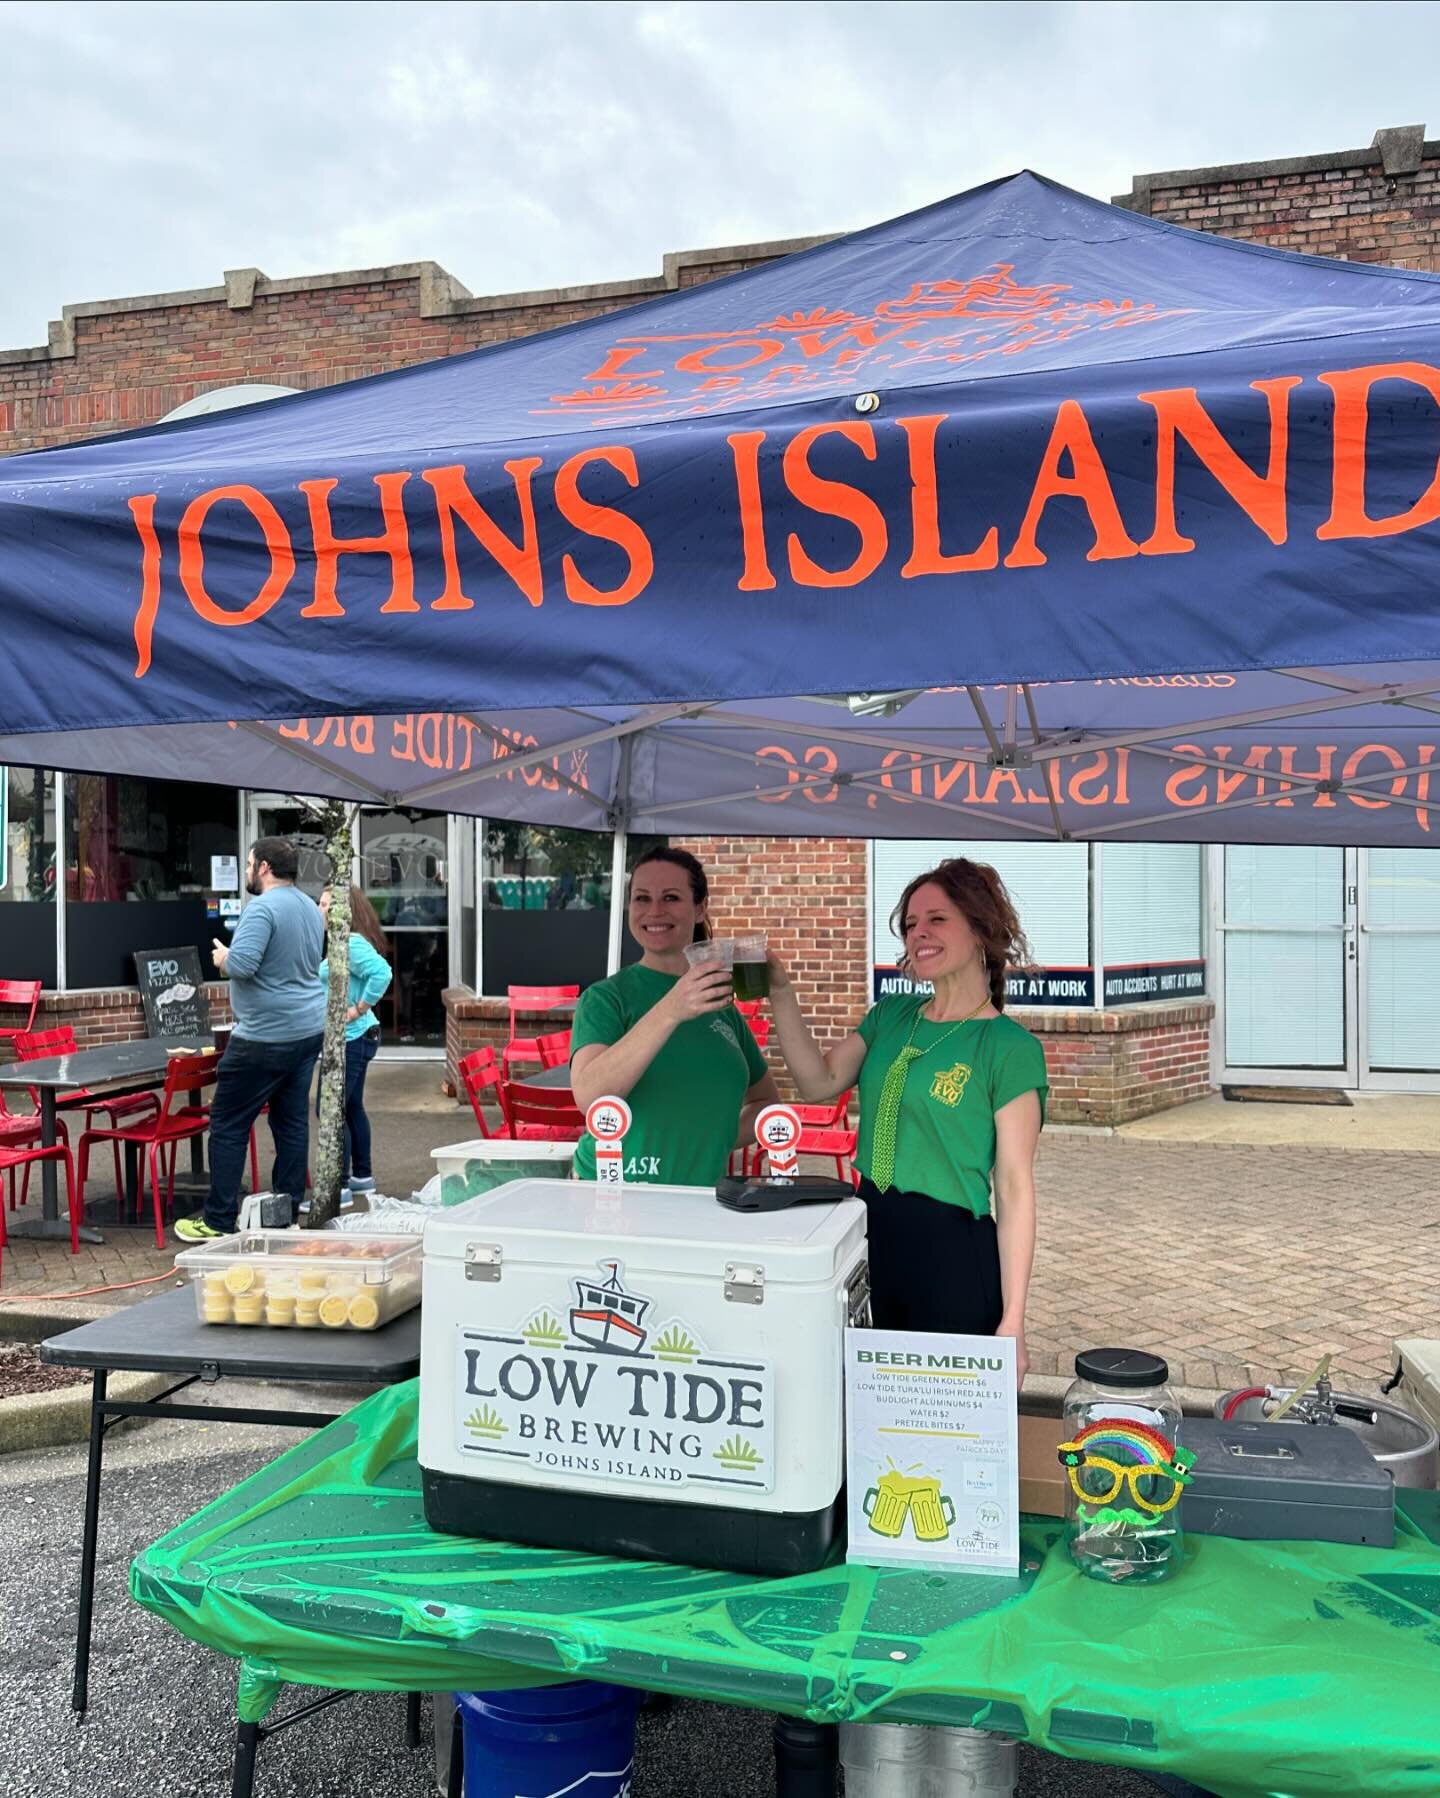 The weather has cleared and we are pouring beers from our friends @lowtidebrewing and @bevibene_brewing !

Come lift your spirits with a brew and some pretzel bites or our special Bangers and Mash Pie today in the pizzeria! ☘️☘️☘️